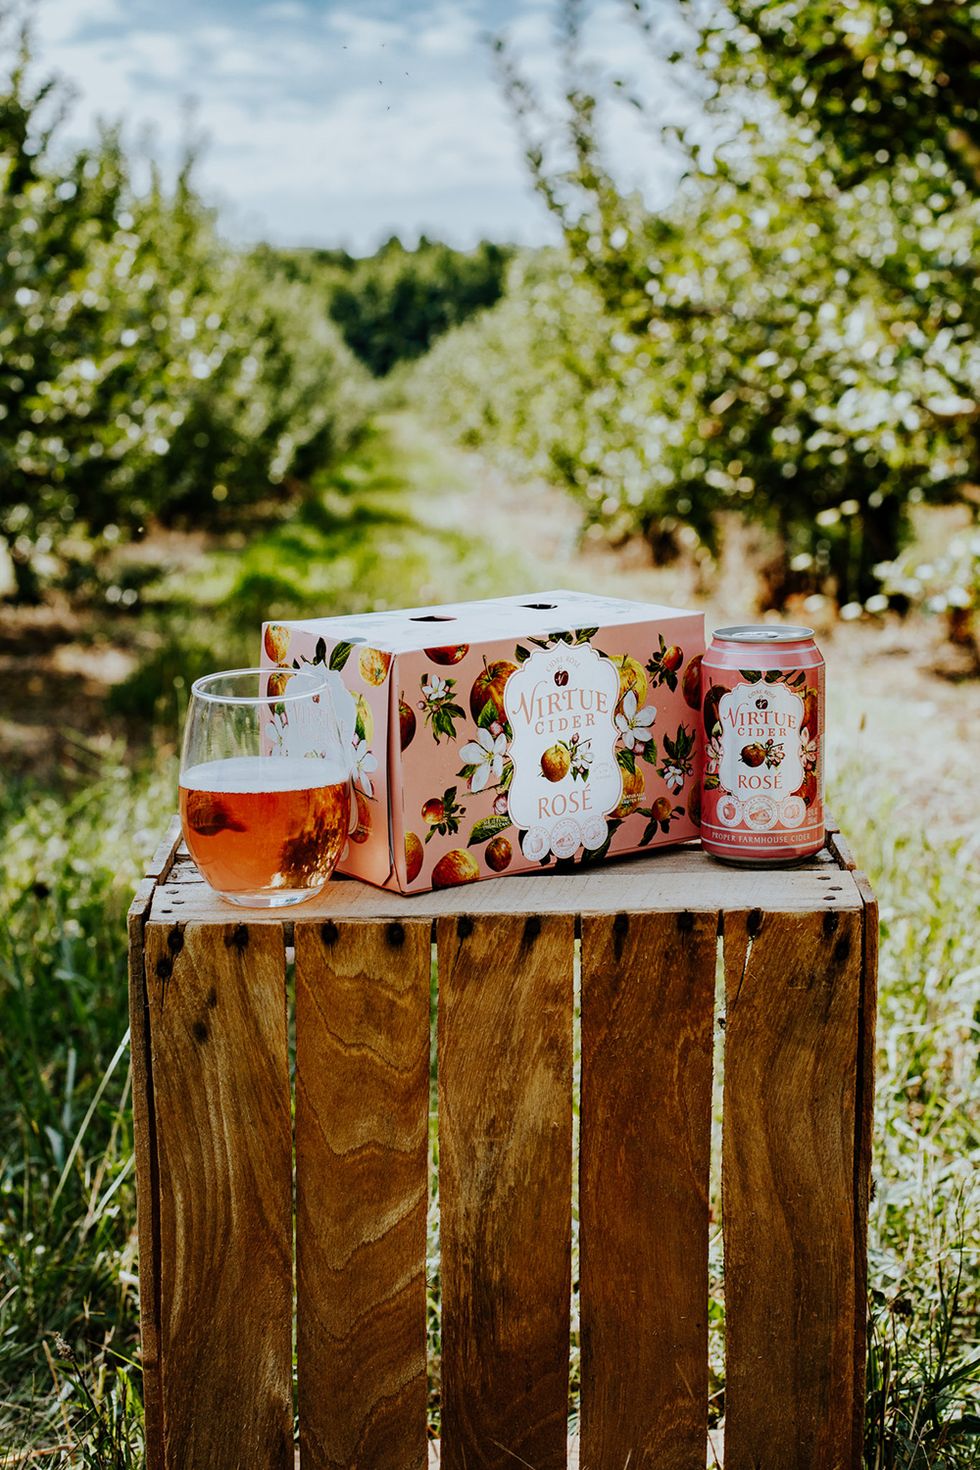 pink virtue cider rose can and box on wooden crate in apple orchard